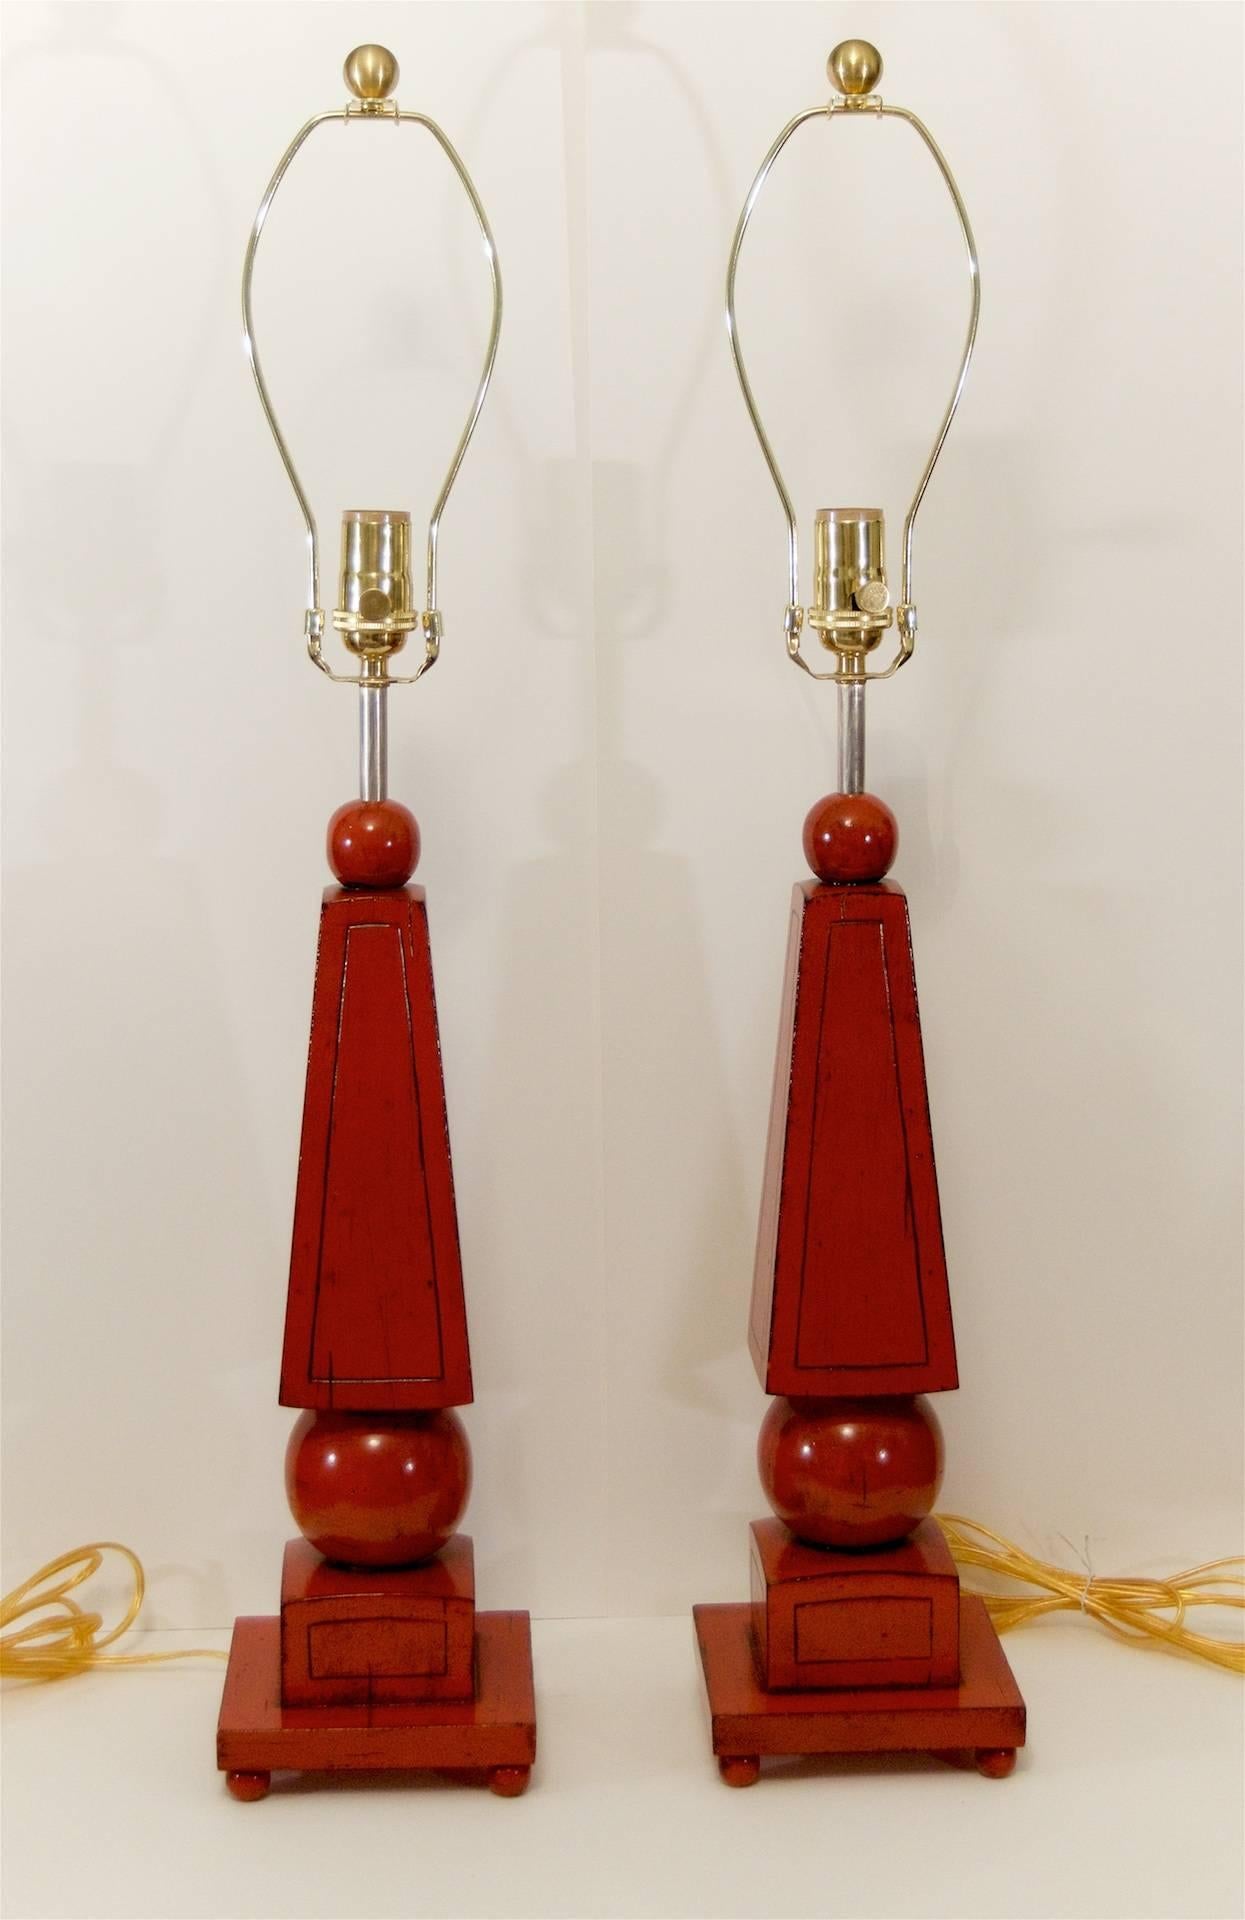 Mid-Century Modern Pair of Red Lacquer Obelisk Form Table Lamps For Sale